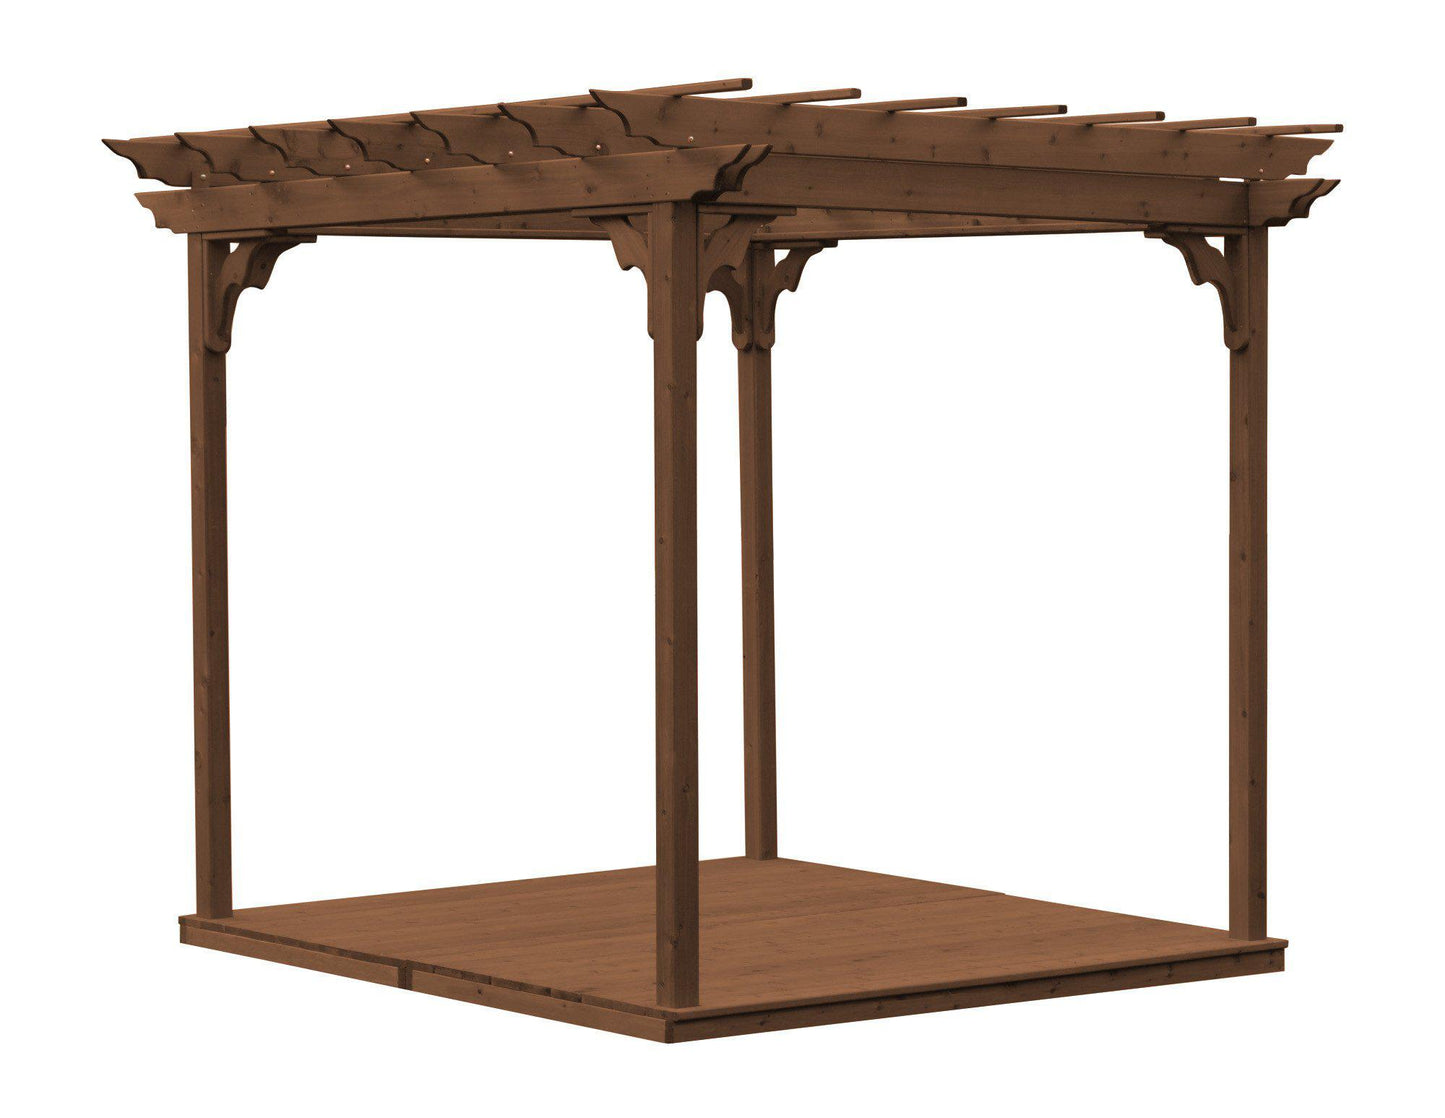 A&L FURNITURE CO. Western Red Cedar 8'x8' Pergola w/Deck & Swing Hangers (THIS ITEM HAS BEEN DISCONTINUED) - LEAD TIME TO SHIP 2 WEEKS